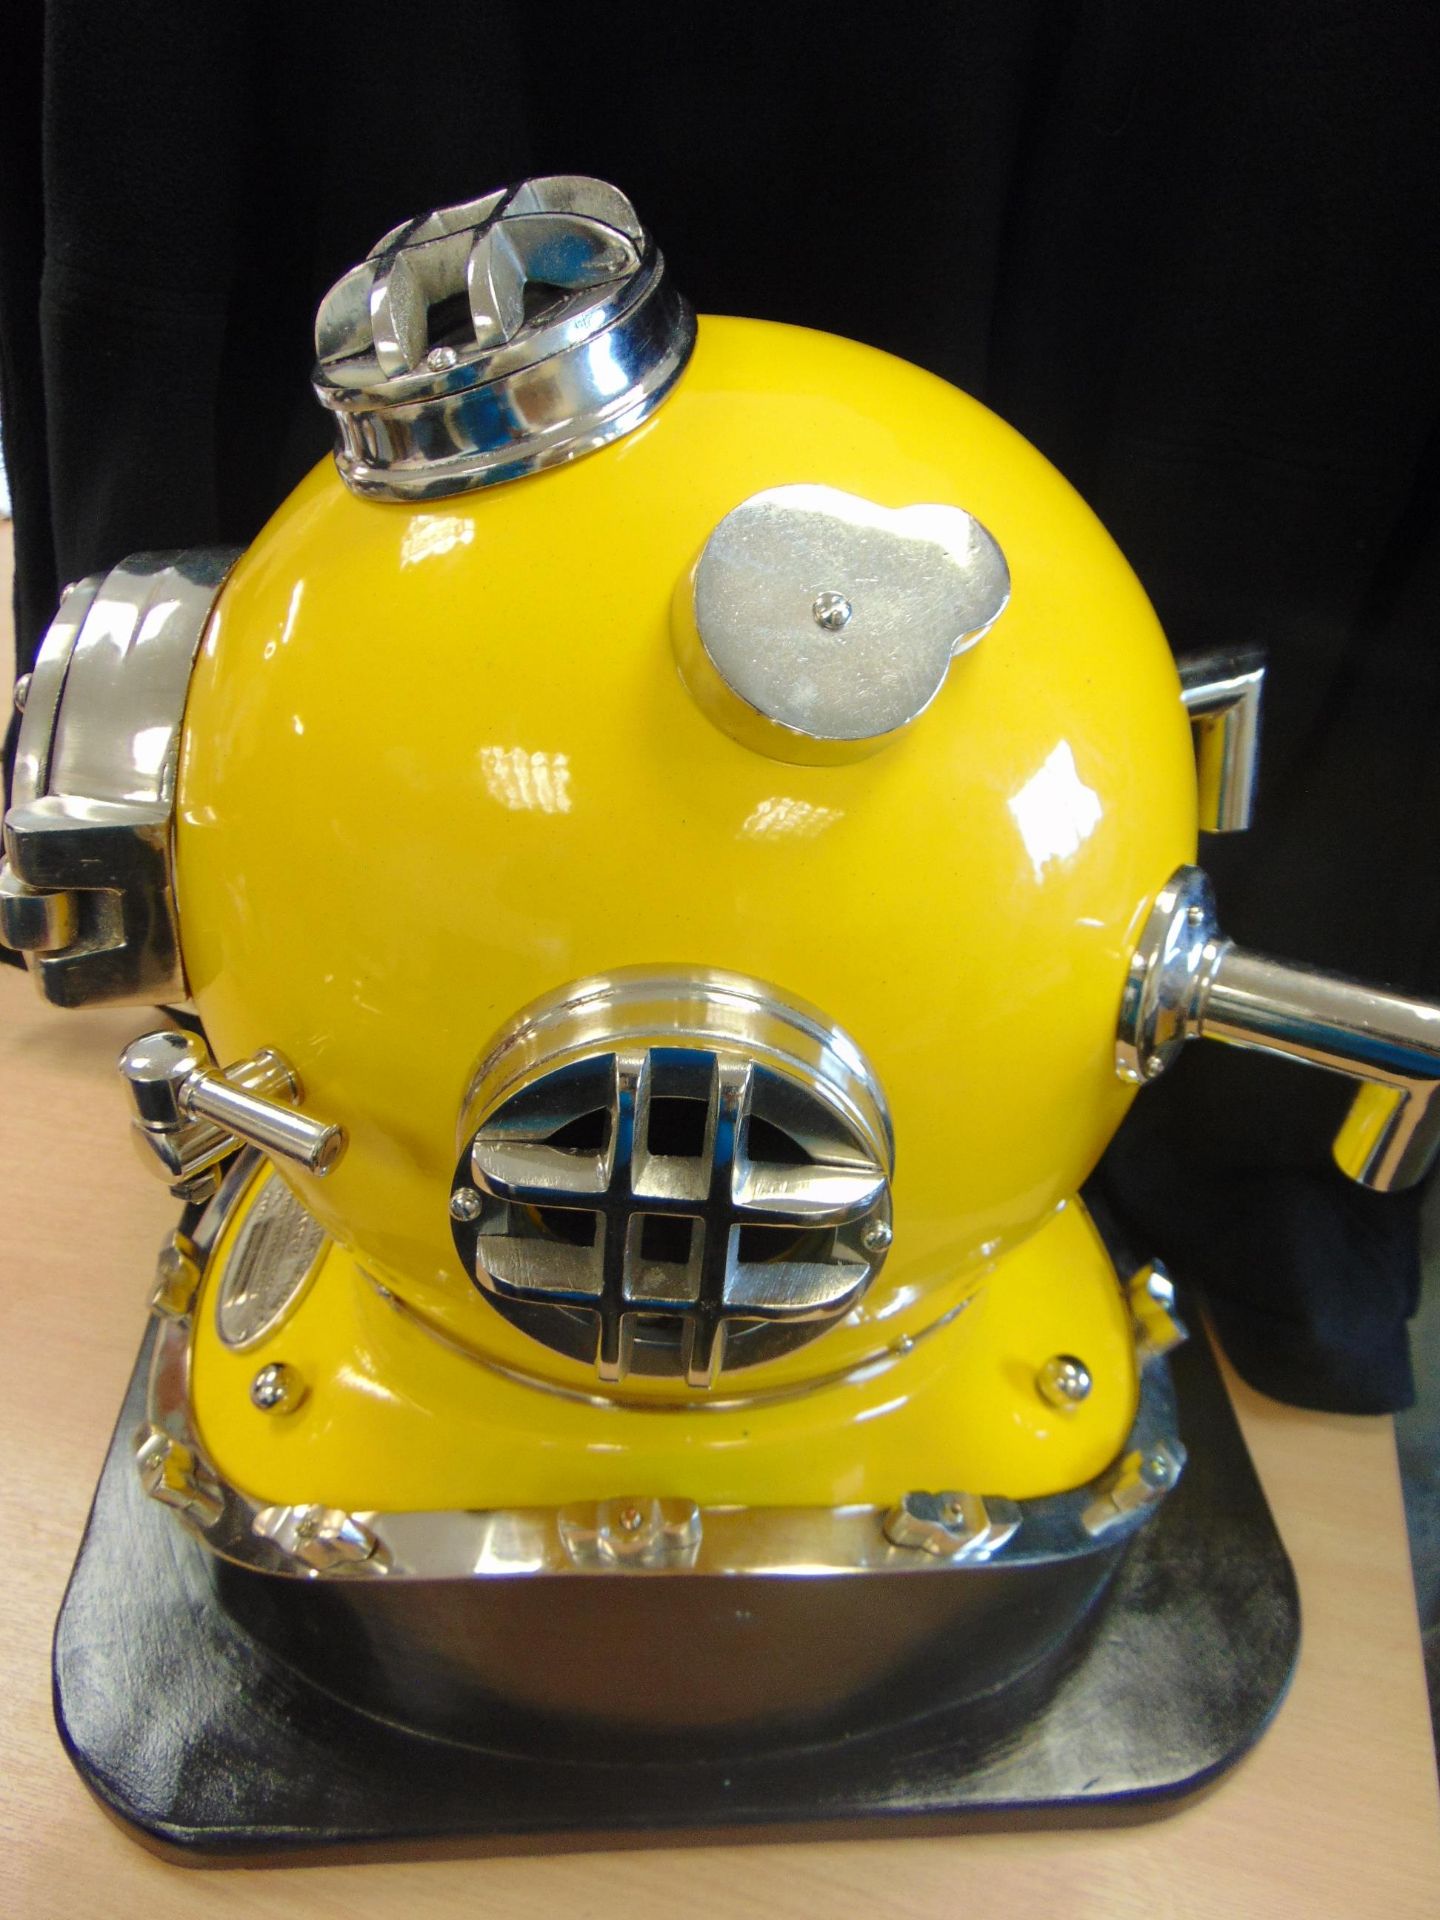 US NAVY MK 5 DIVING HELMET REPRO ON BASE 50 CMS X 40 CMS X 46 CMS - Image 2 of 7